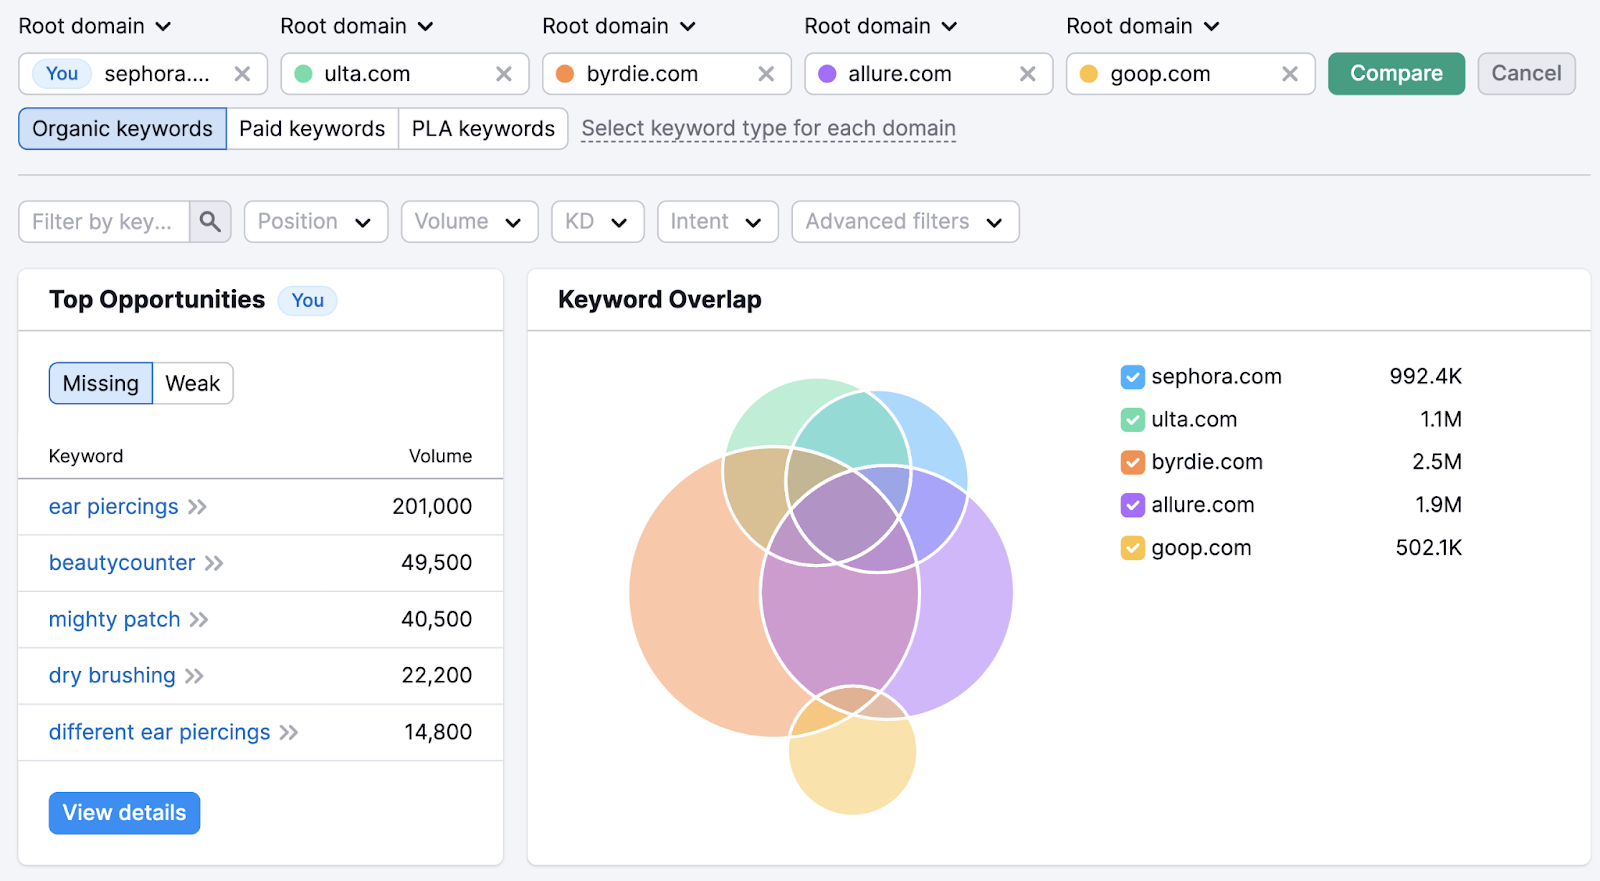 keyword overlap and top opportunities reports